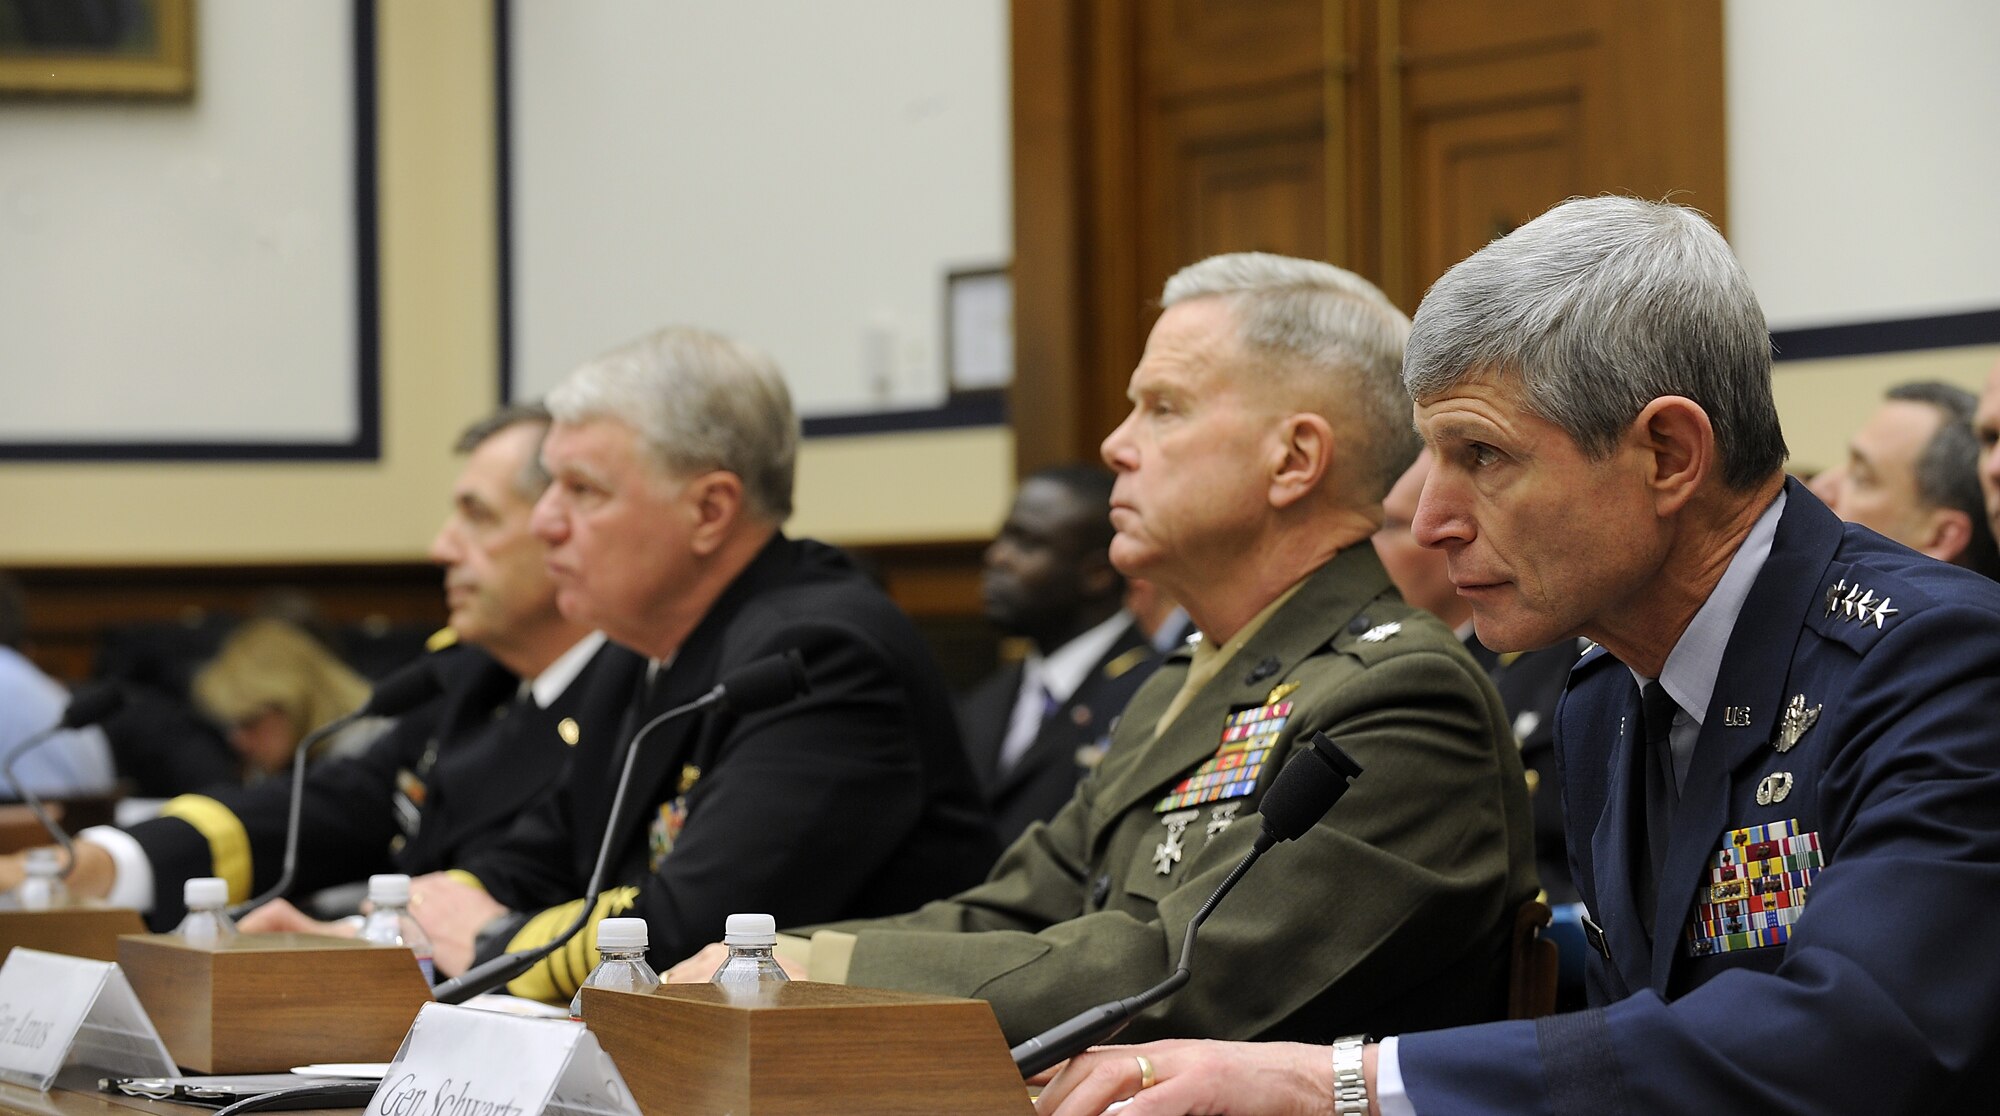 Air Force Chief of Staff Gen. Norton Schwartz (right) listens to a question during testimony before the House Armed Services Committee in Washington, D.C., on April 7, 2011.  General Schwartz was joined by (left to right) Army Vice Chief of Staff Gen. Peter Chiarelli, Chief of Naval Operations Adm. Gary Roughead, and Marine Corps Commandant Gen. James Amos.  (U.S. Air Force photo/Scott M. Ash)
